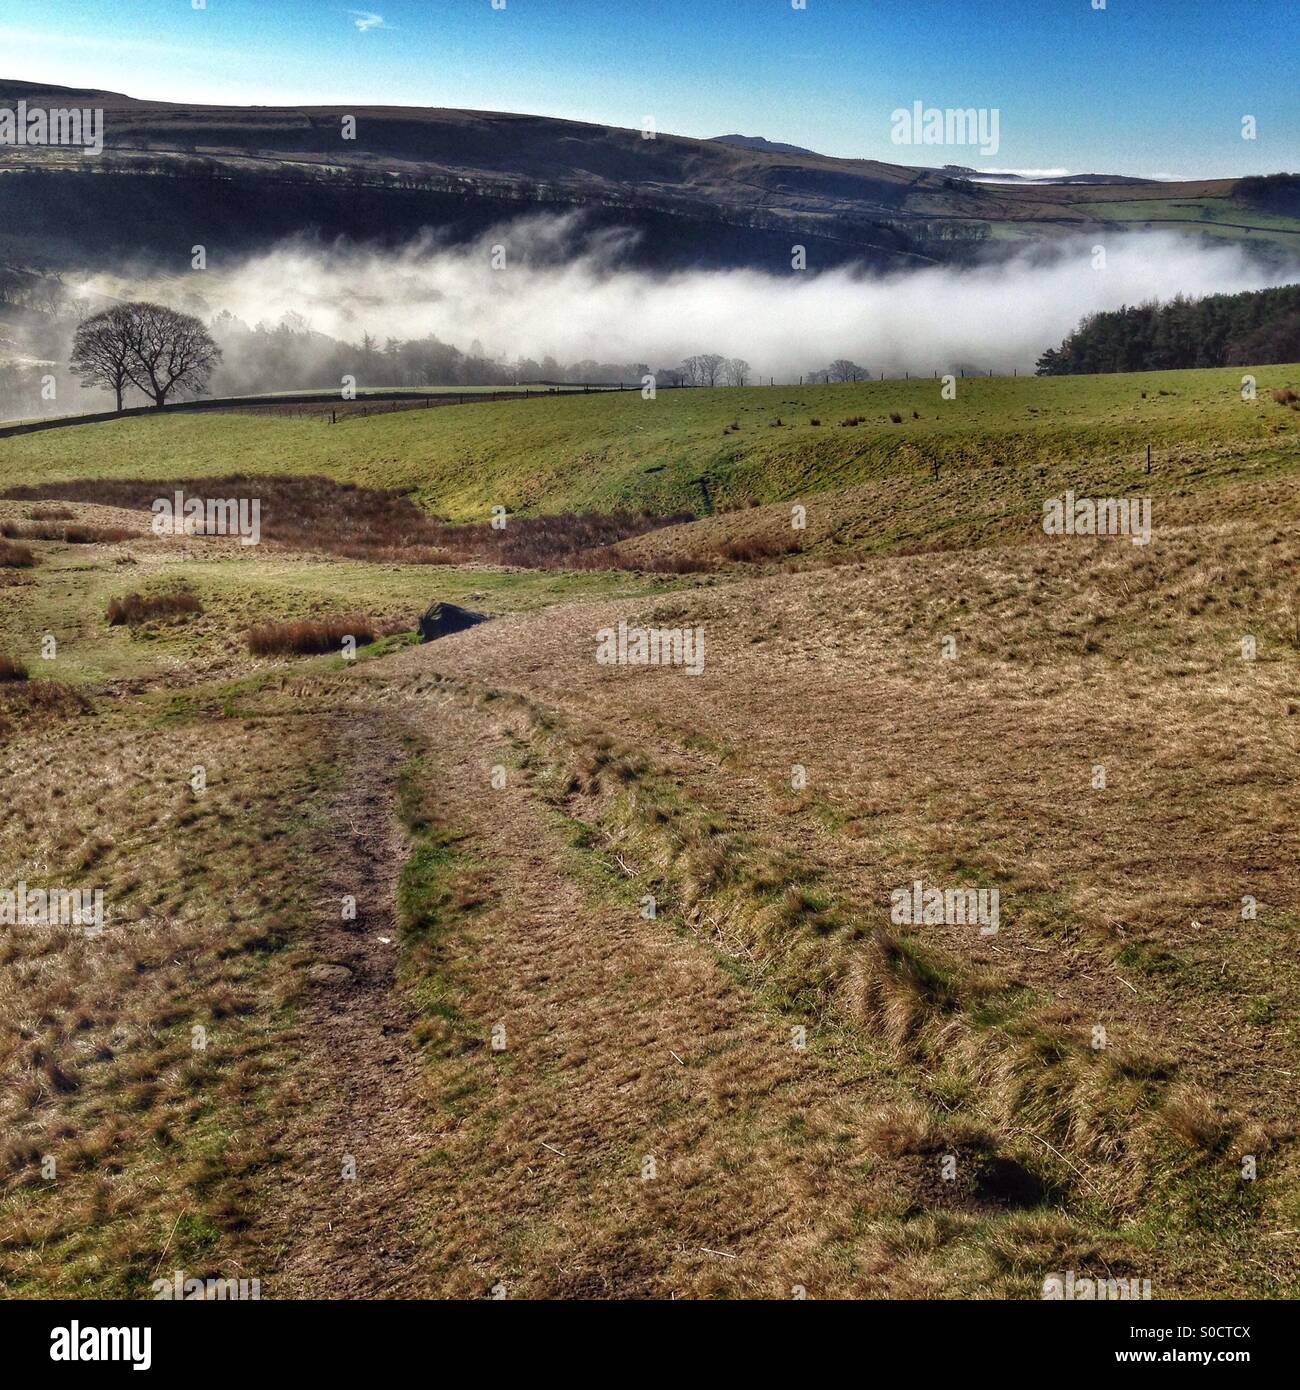 Wildboarclough in Cheshire shrouded in mist. Stock Photo